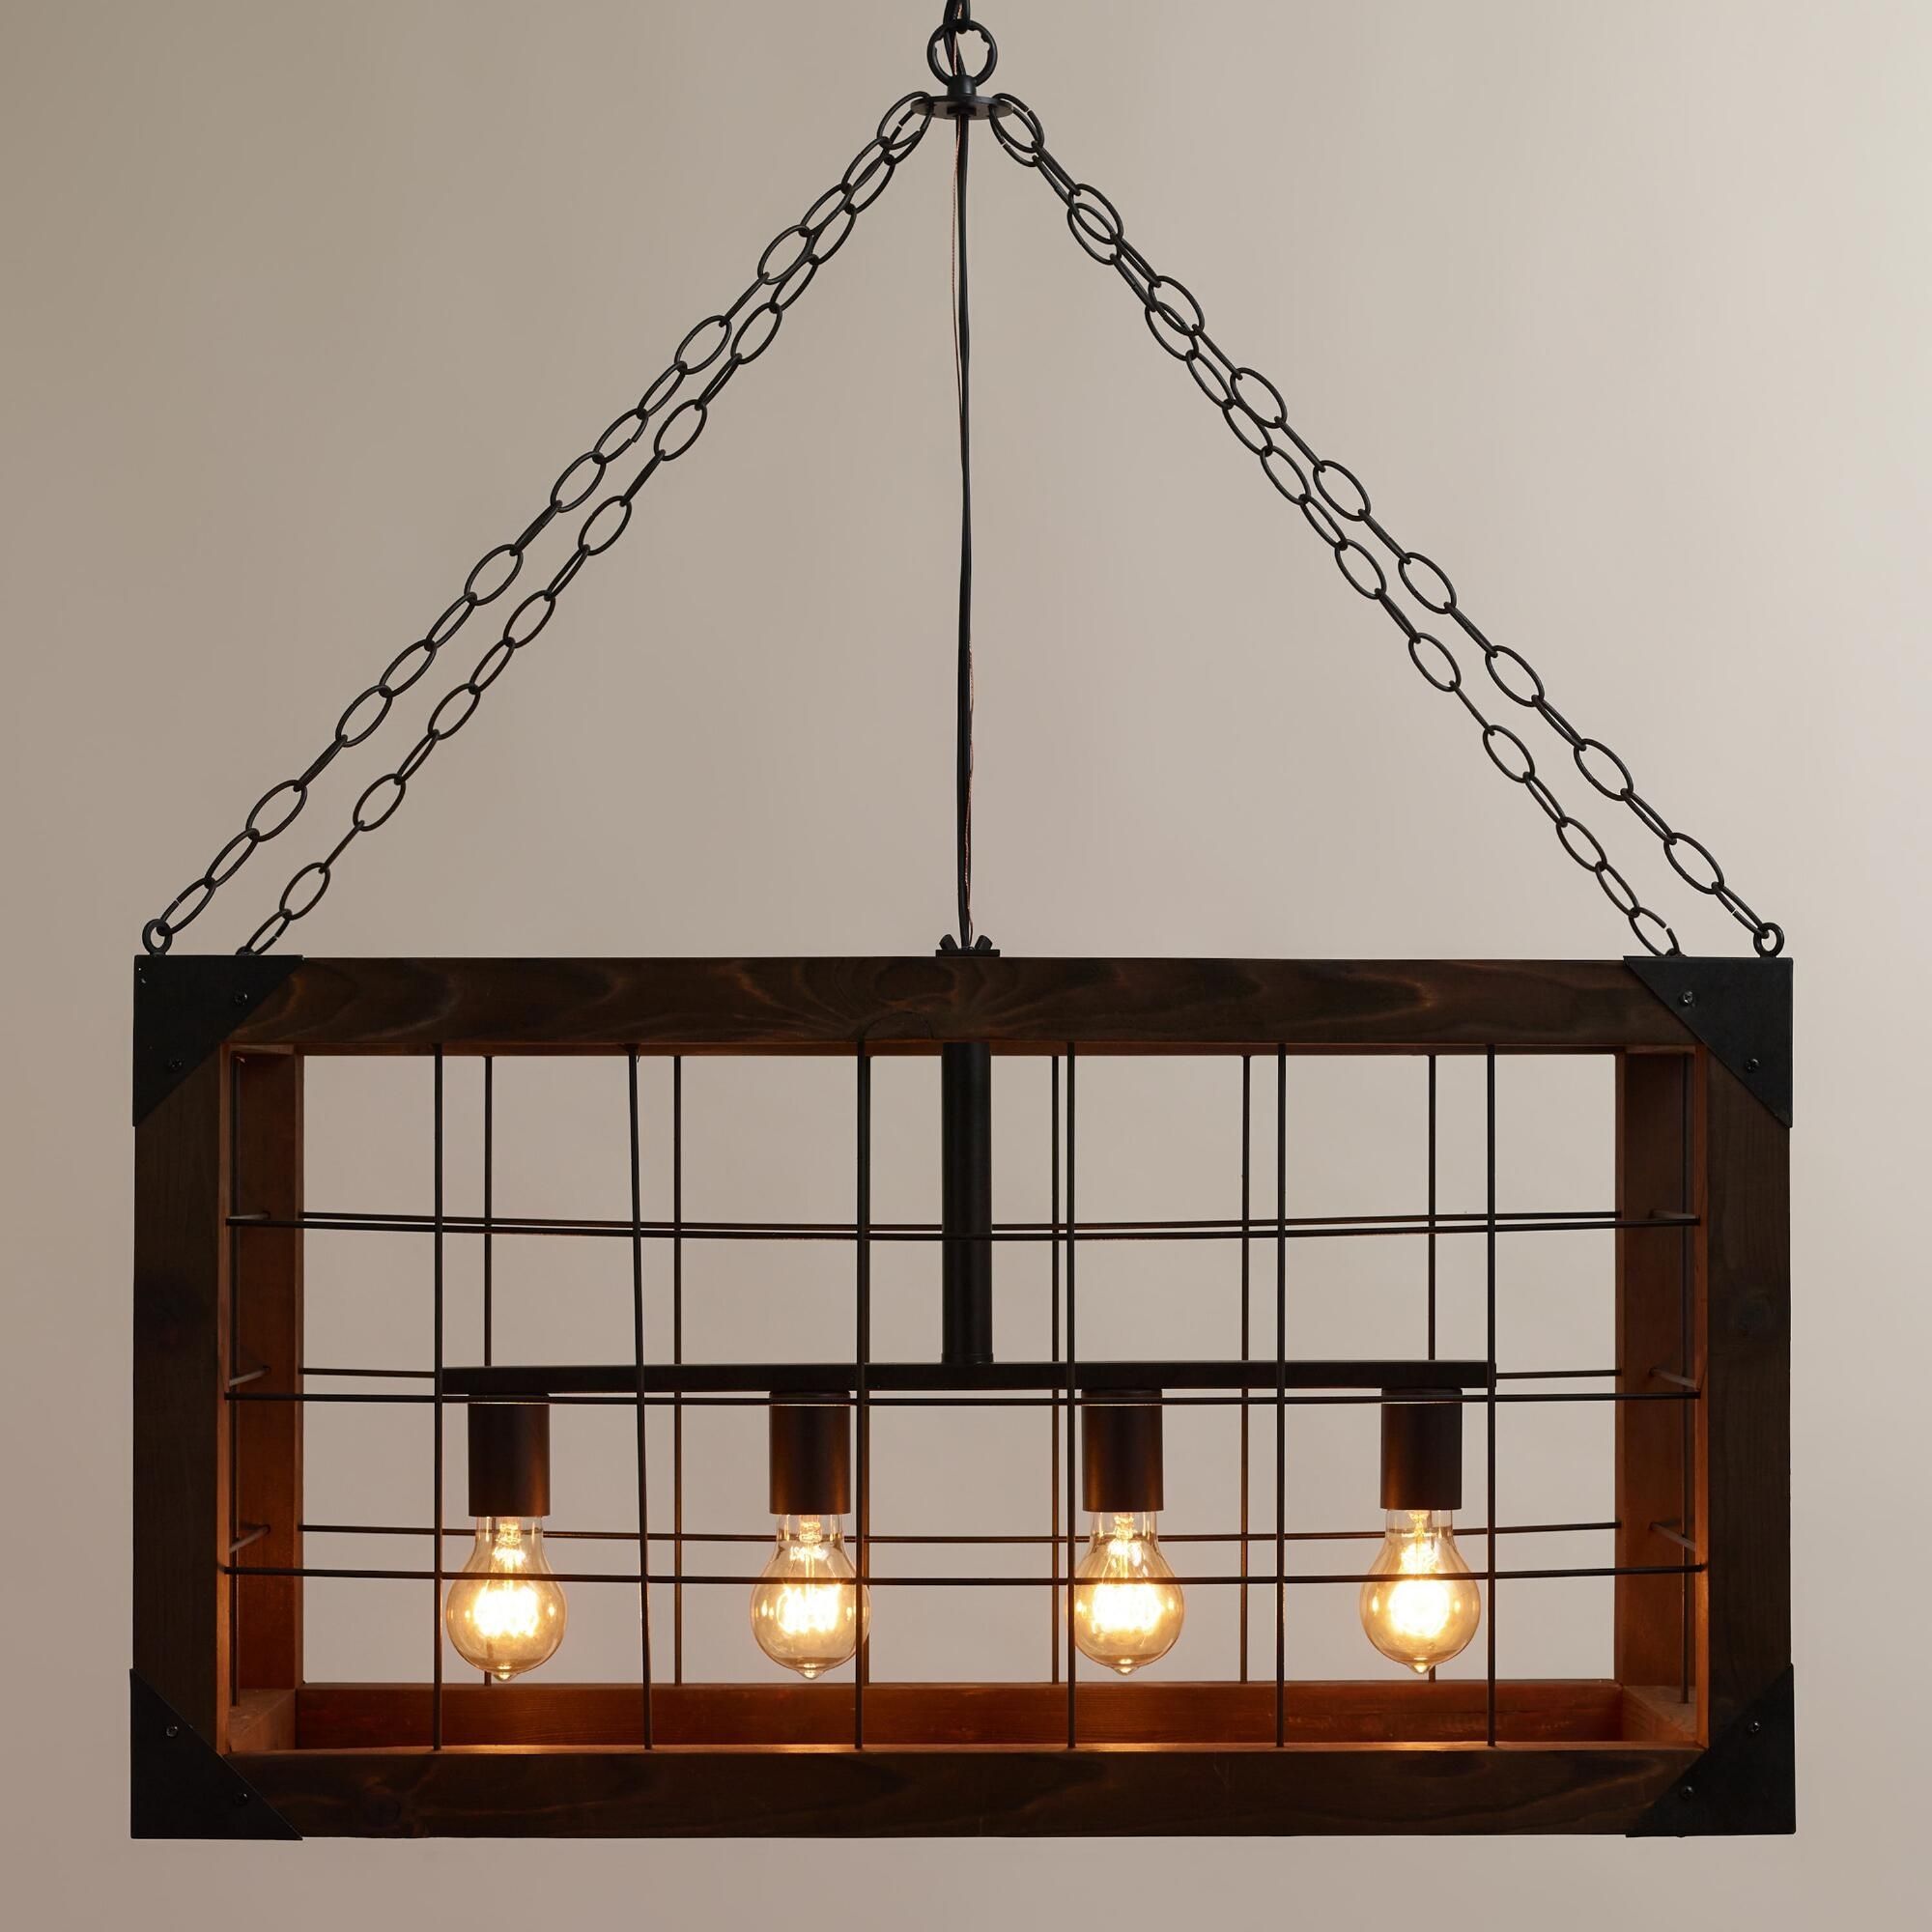 45 Beautiful Crucial Top Large Pendant Lighting Light Fixtures Intended For Big Outdoor Hanging Lights (View 4 of 15)